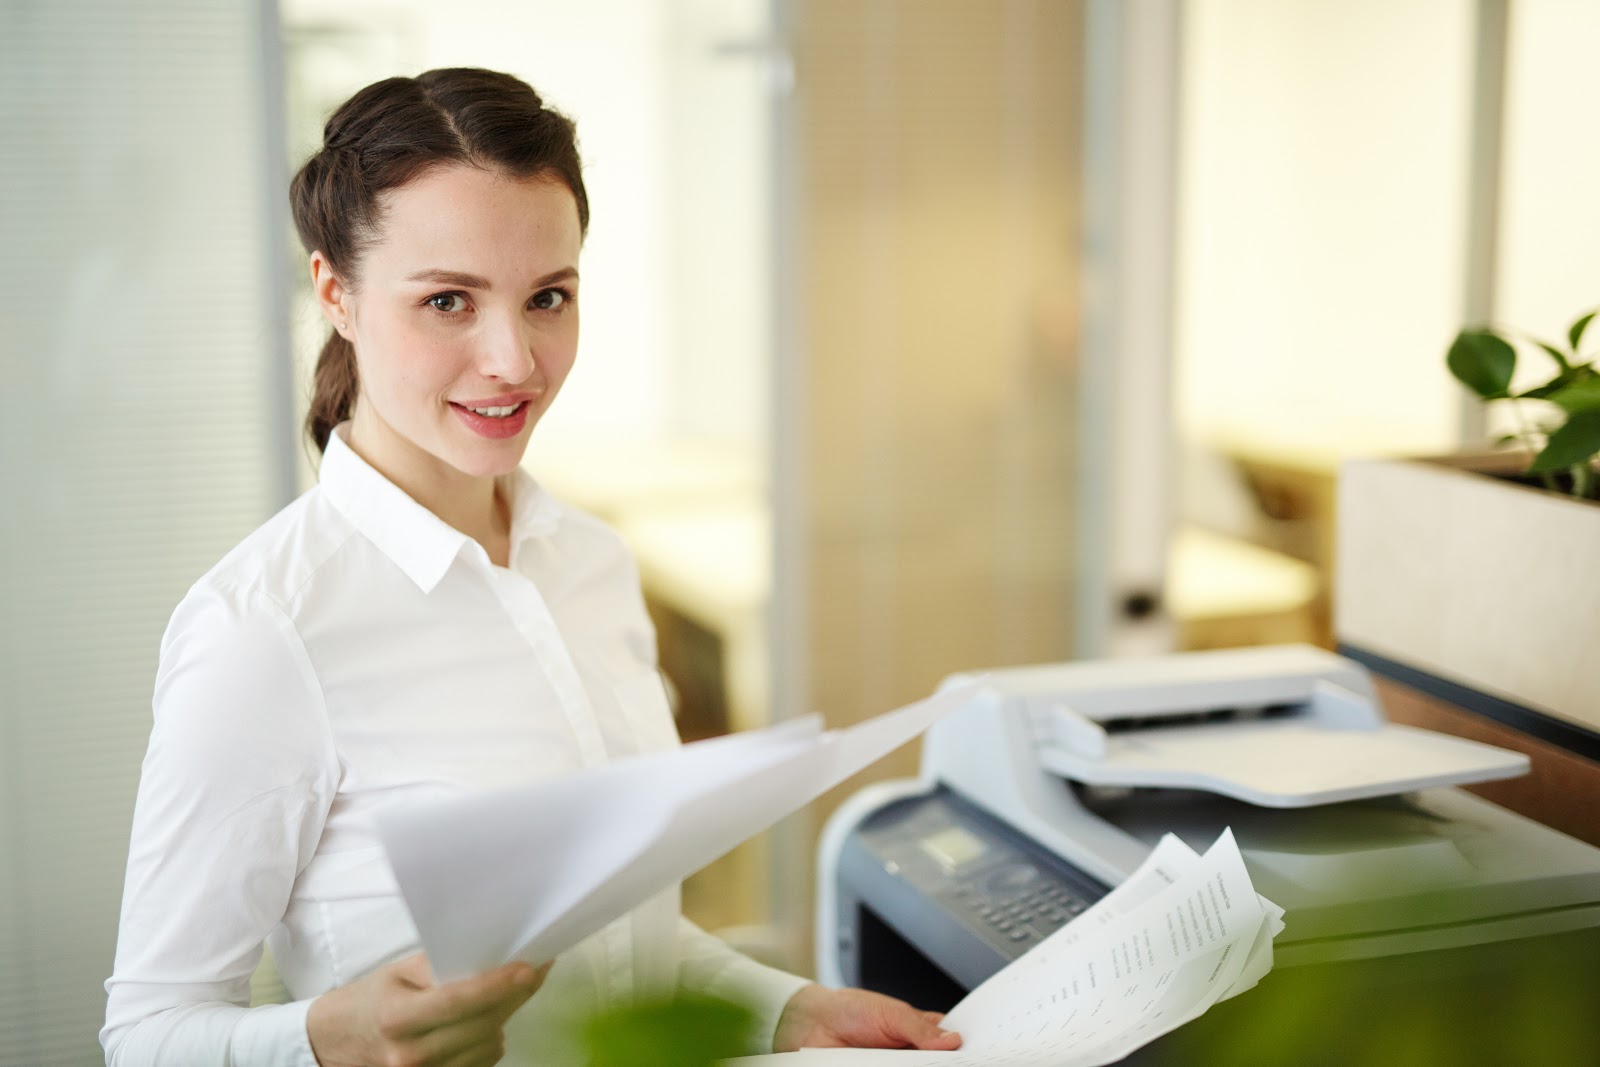 You are currently viewing Copier Lease vs. Buy Analysis: Which Is Right For You?